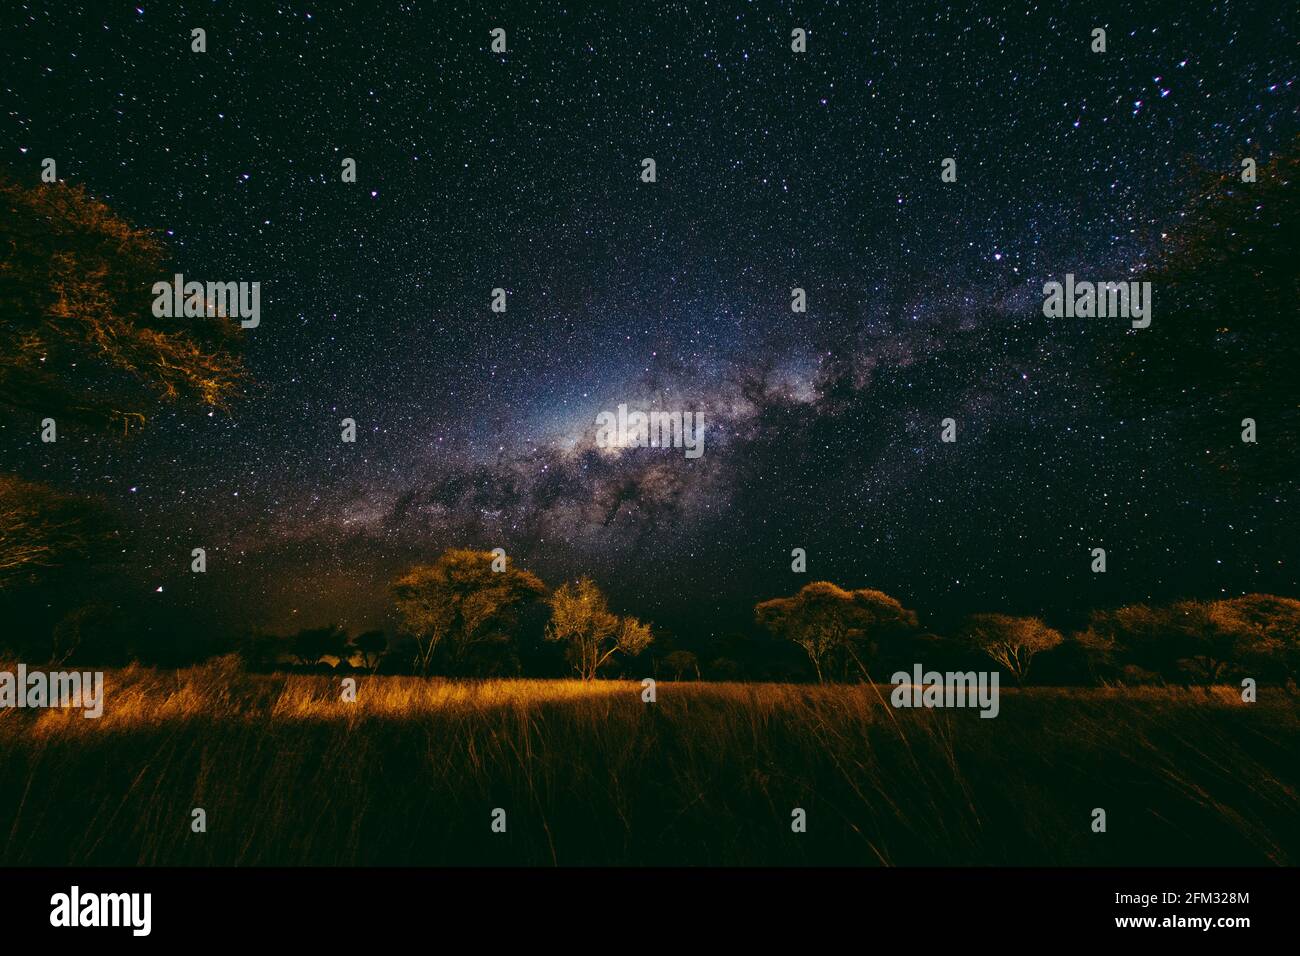 Milky way night sky over African plains, Namibia Stock Photo